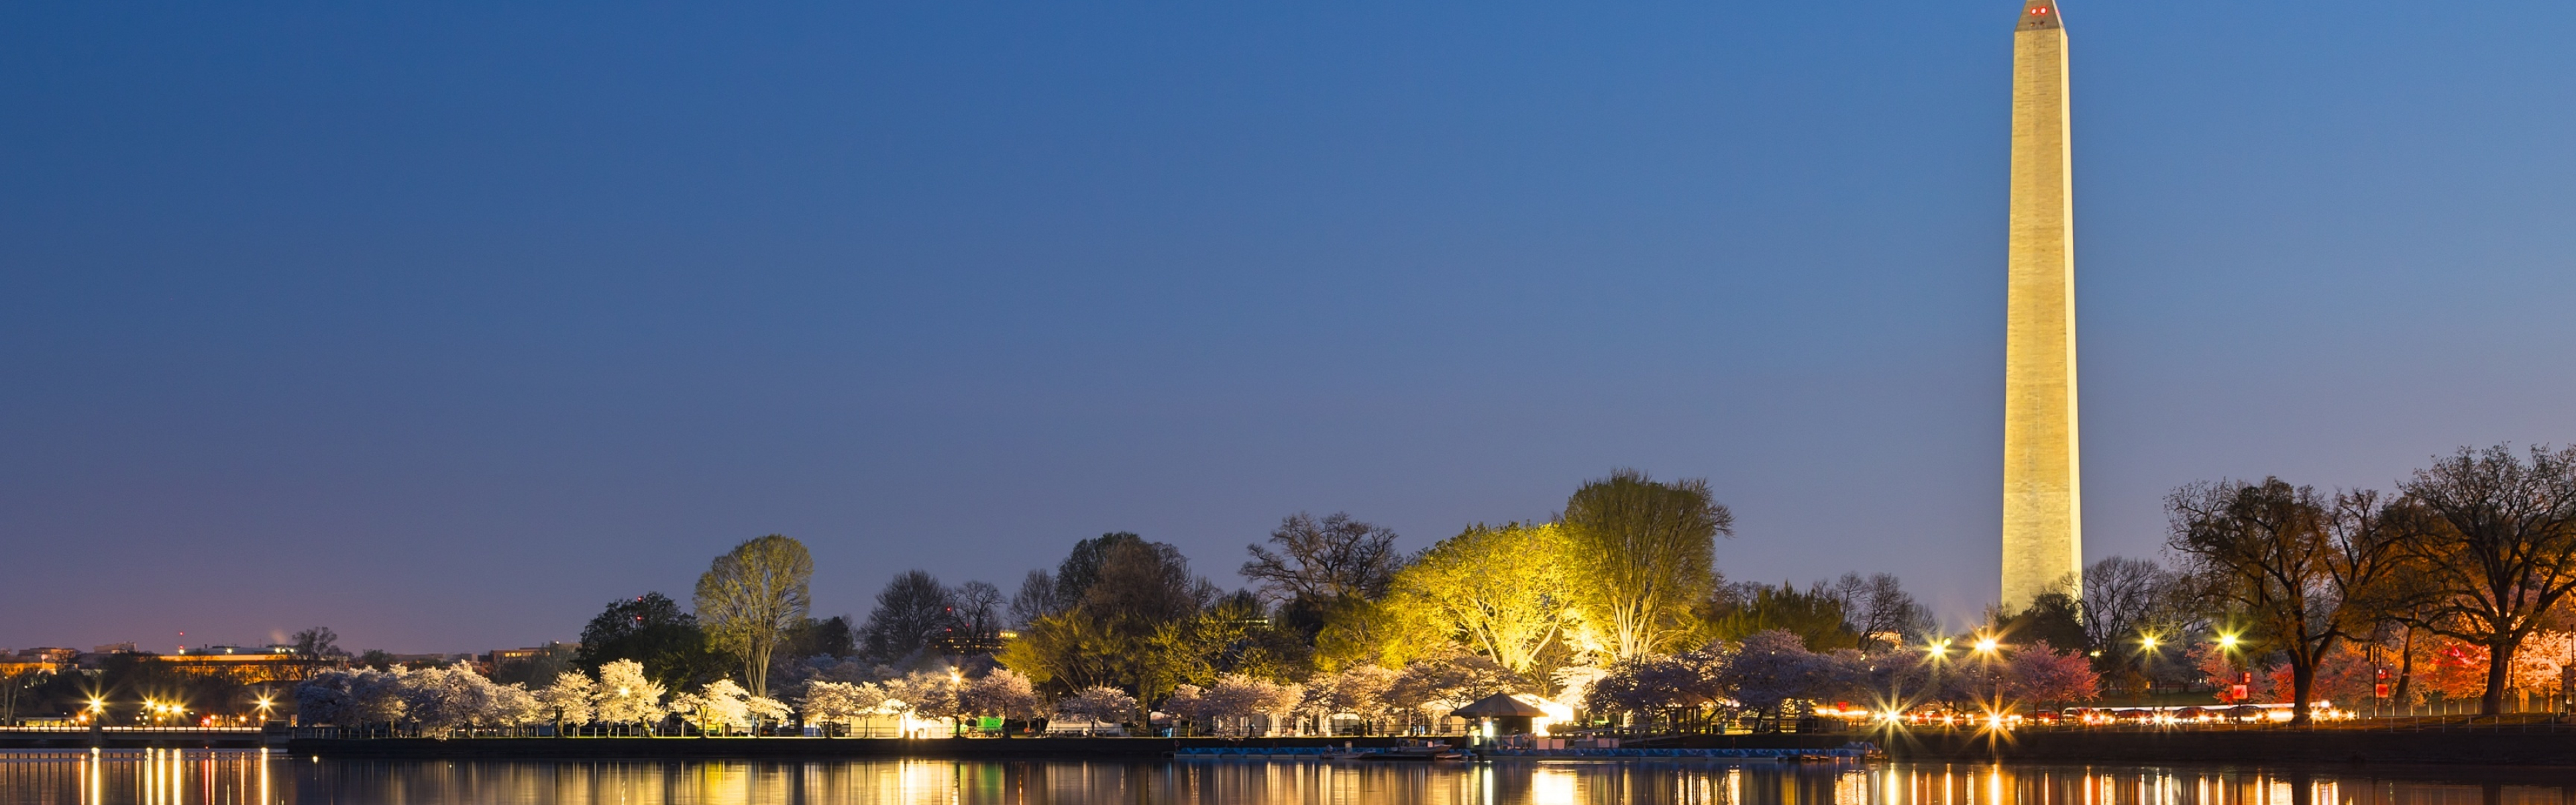 Washington, D.C.: One of the most visited cities in the U.S.. 3840x1200 Dual Screen Wallpaper.